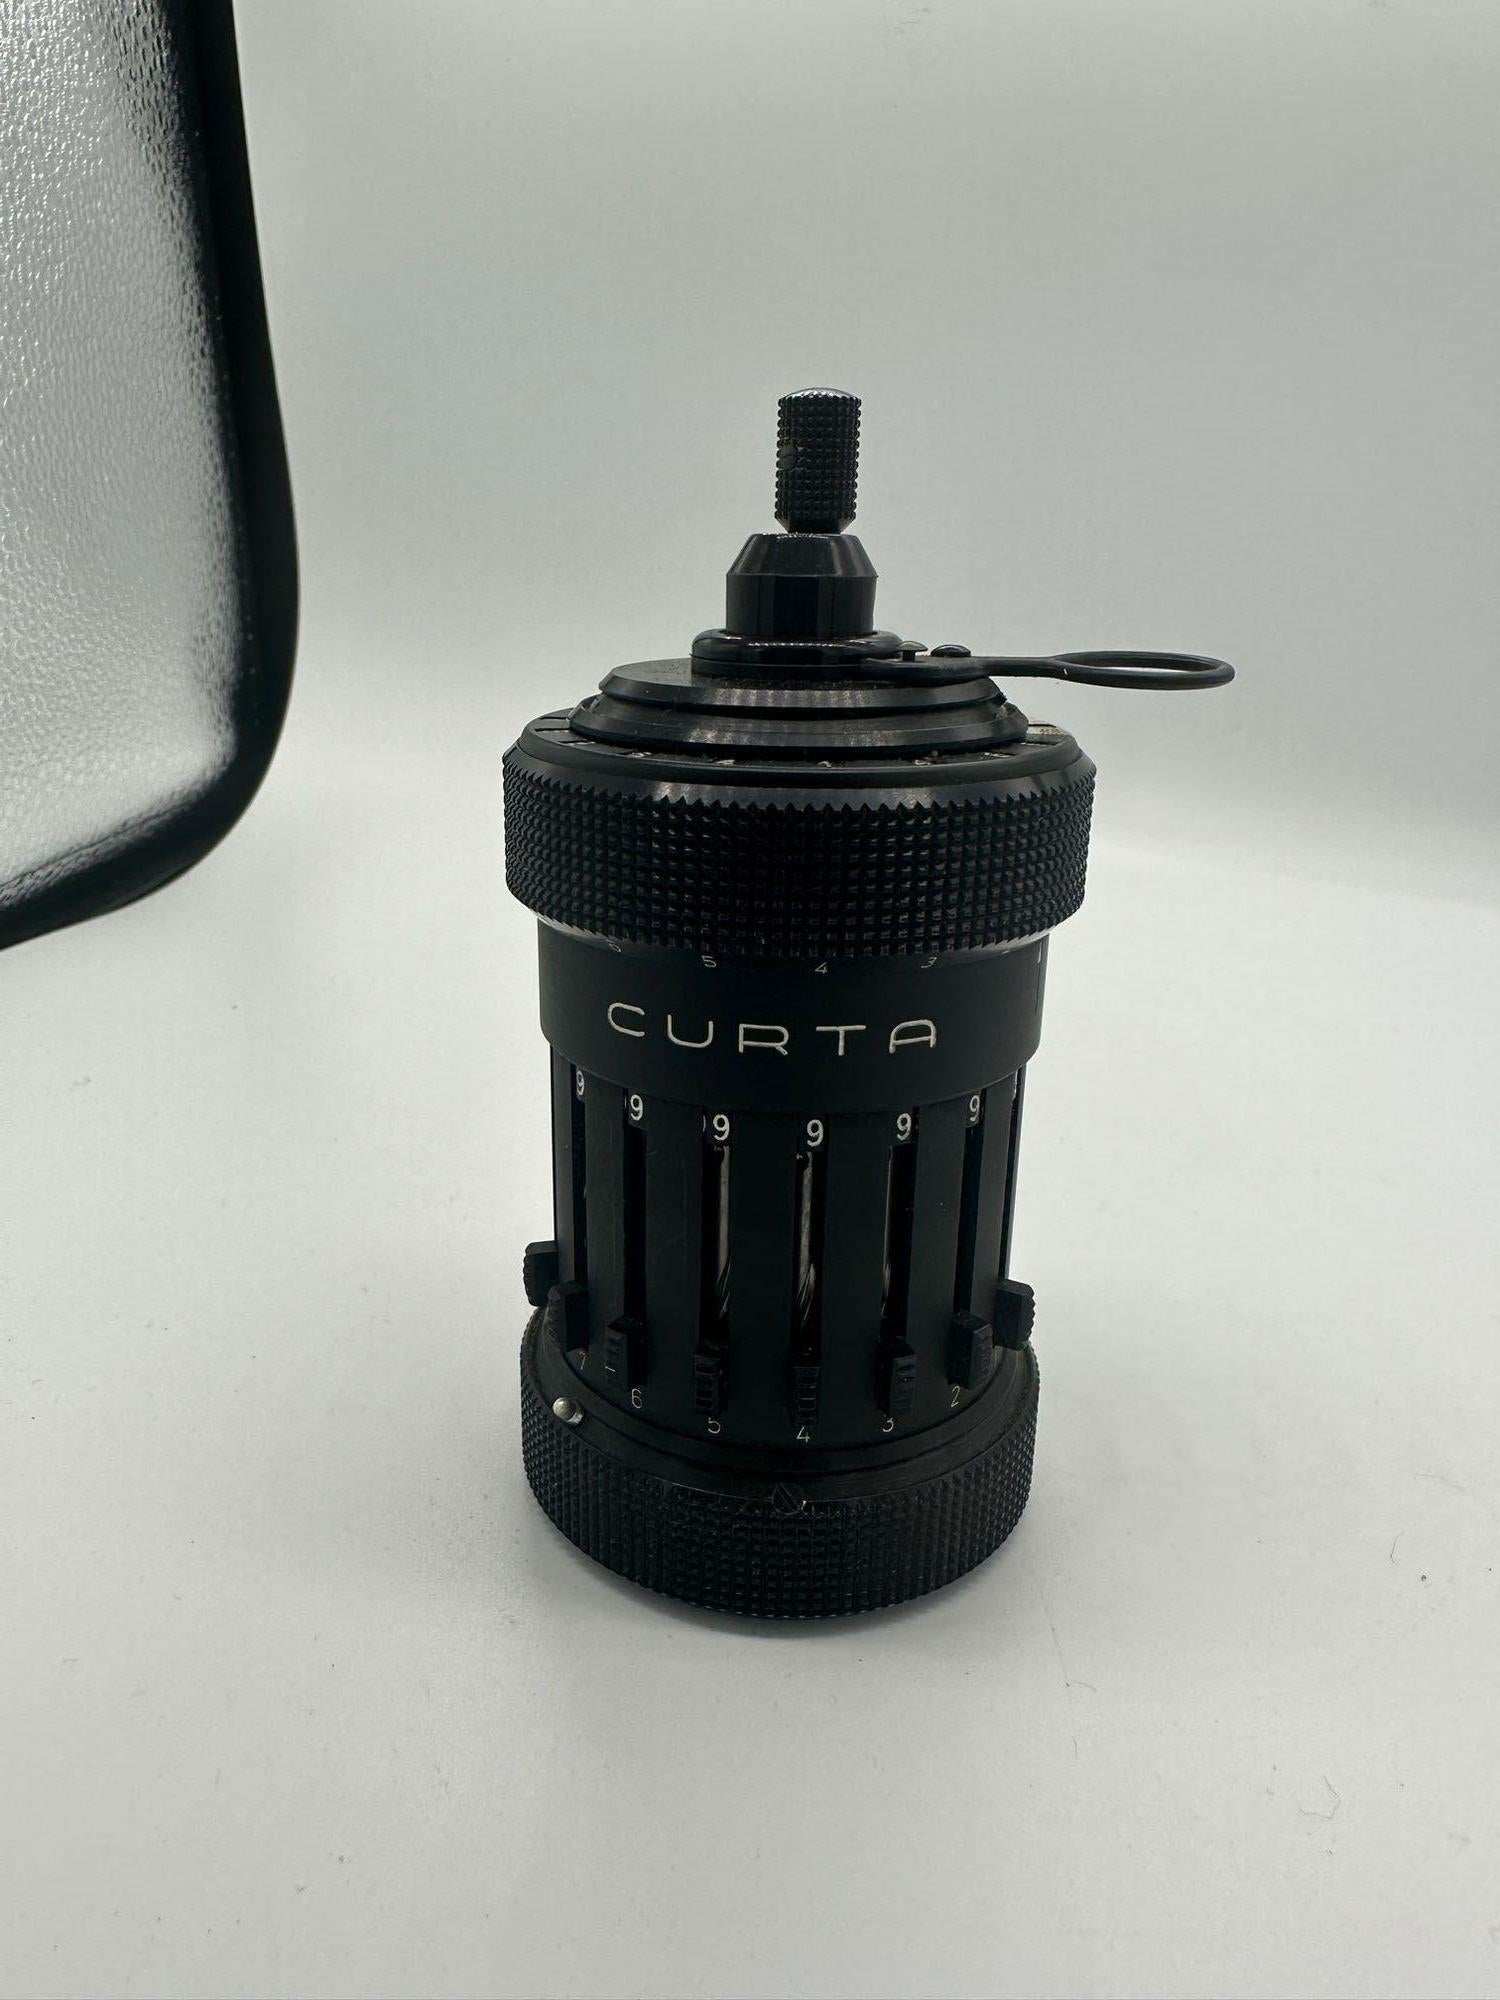 Rare 1964 Vintage Curta Type 1 Mechanical Calculator With serial number 10315, the 